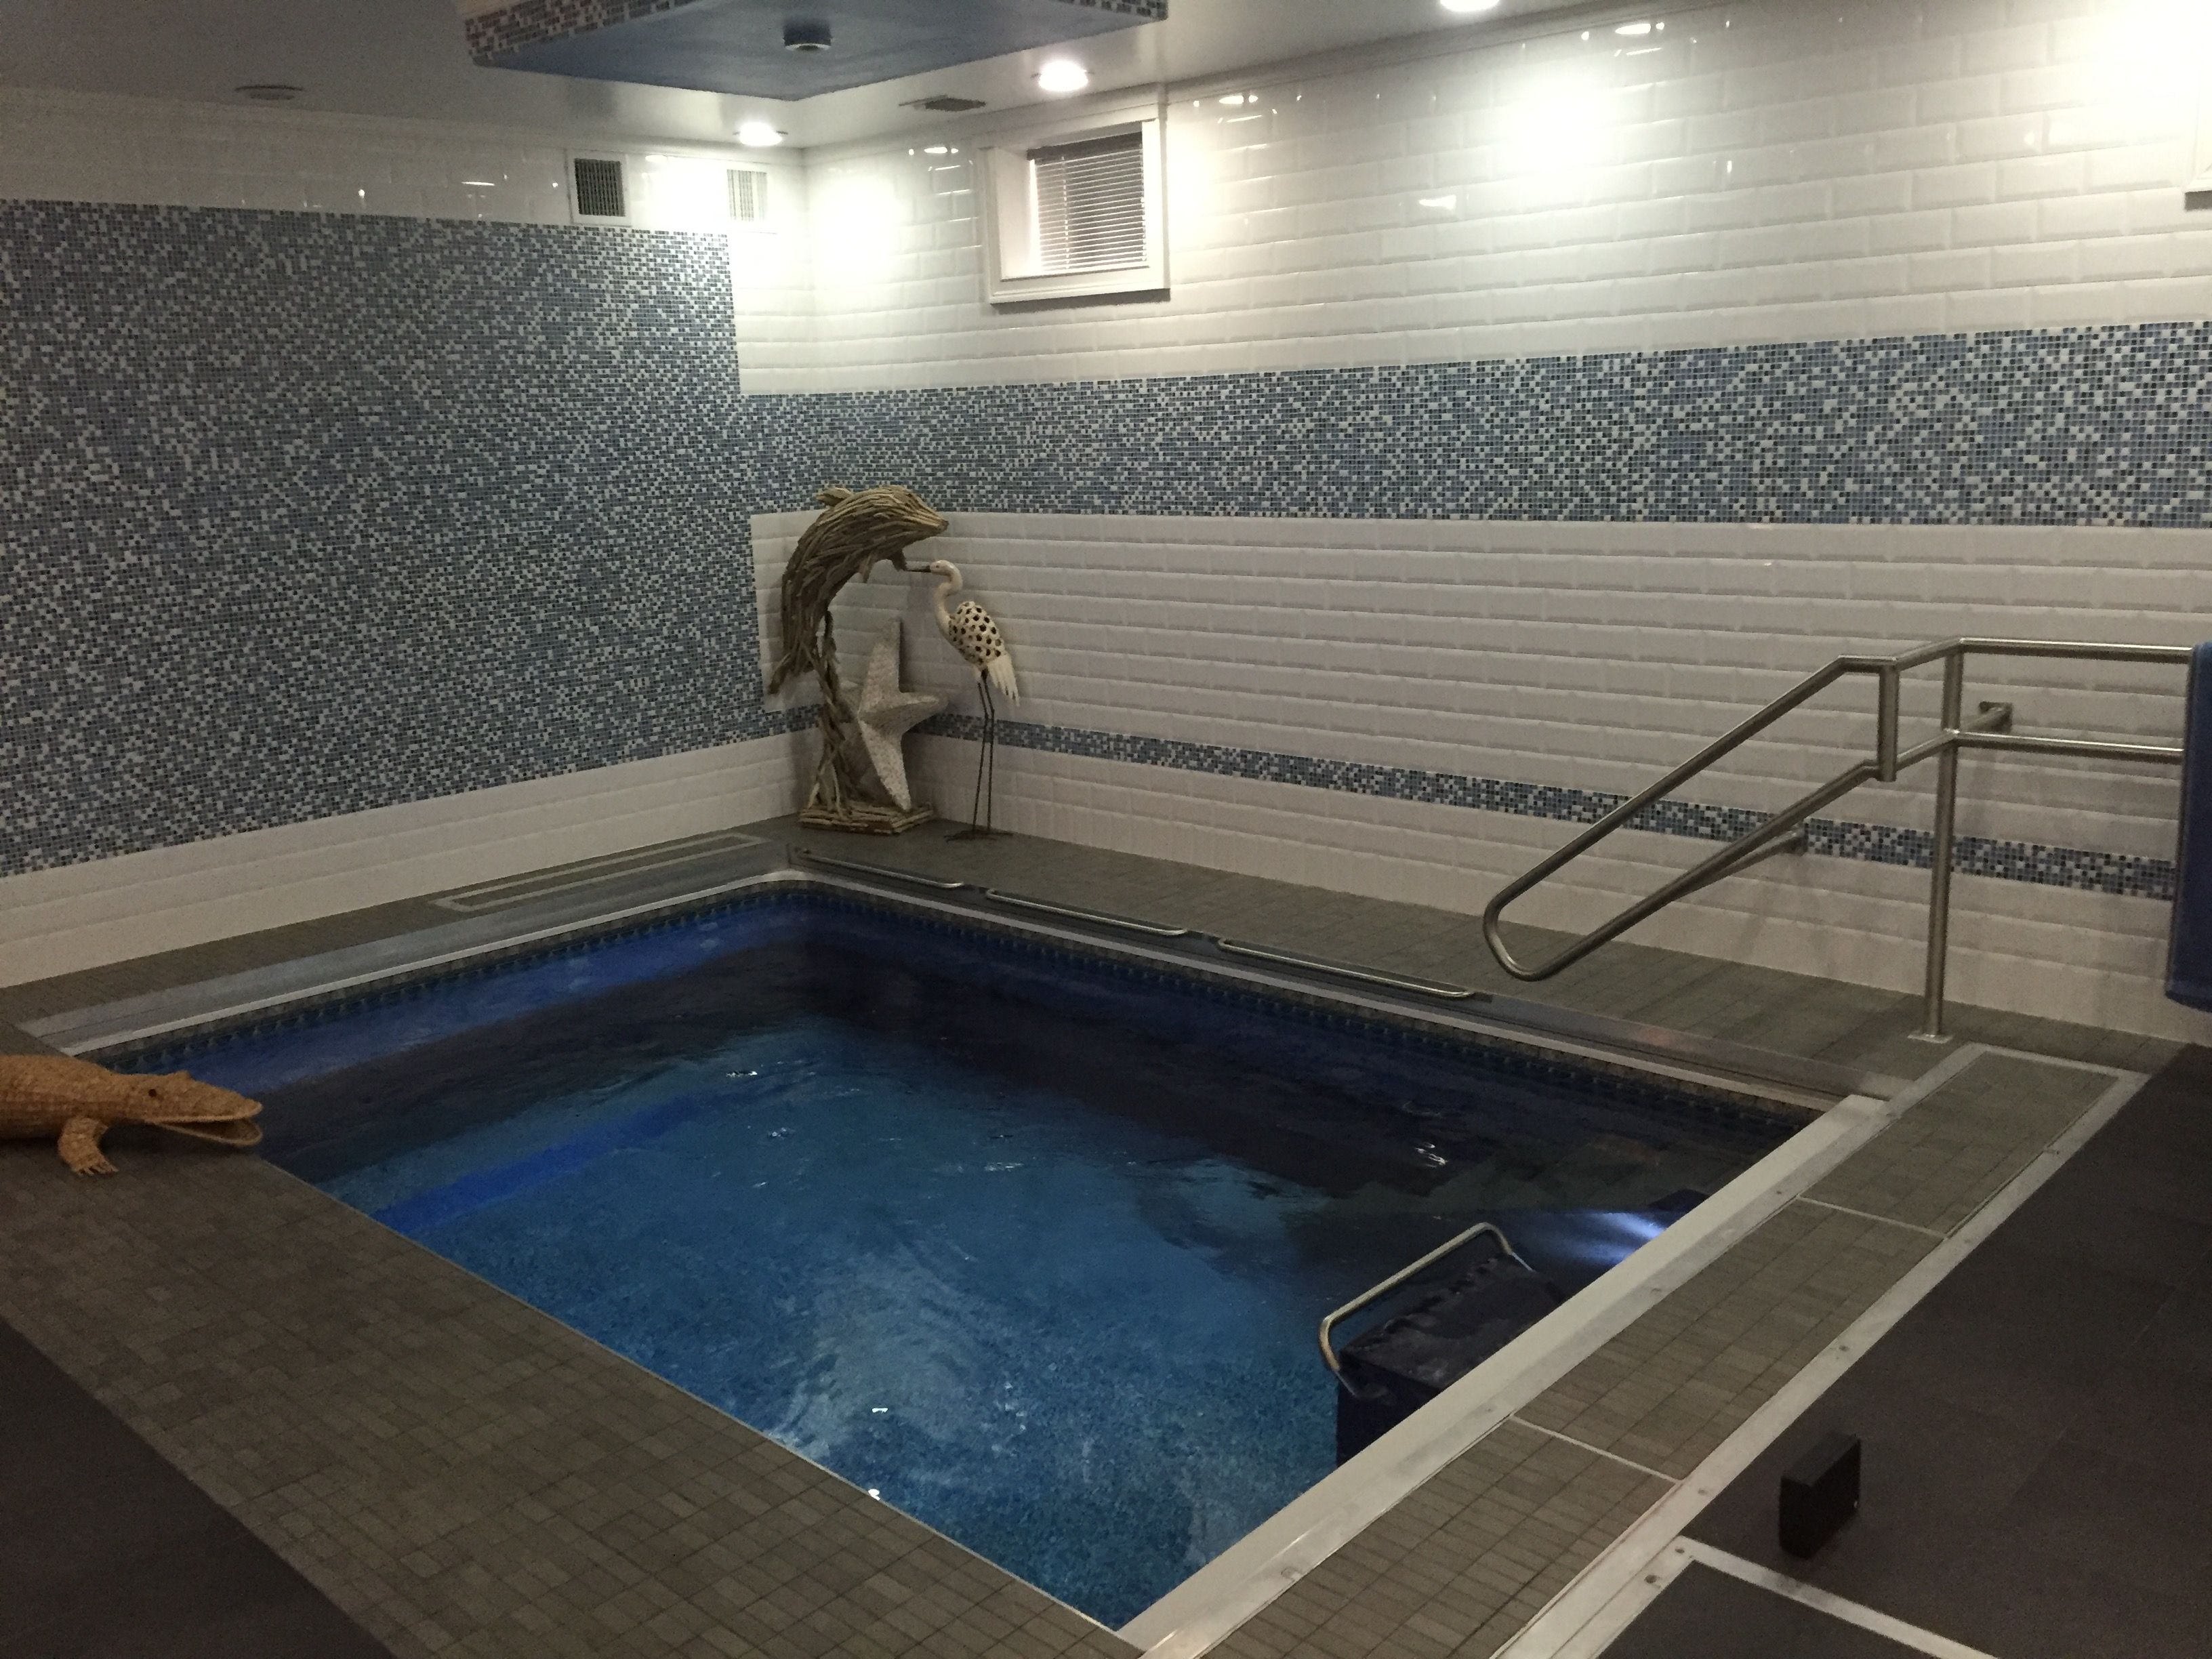 an Endless Pool used for aquatic therapy to treat cerebral palsy